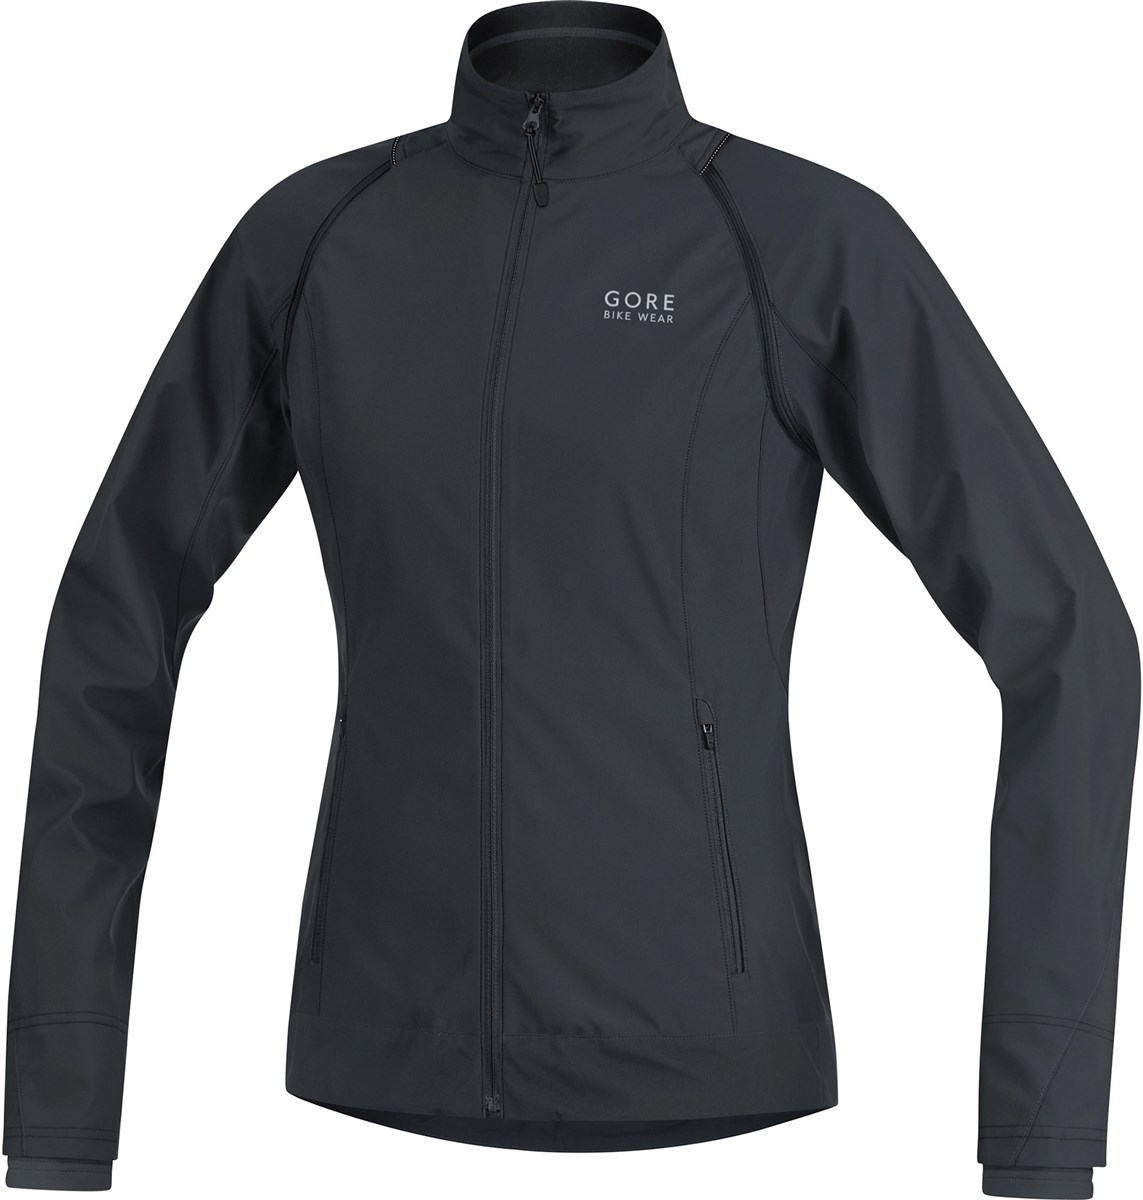 Gore E Gore Womens Windstopper Zip-Off Jacket AW17 product image